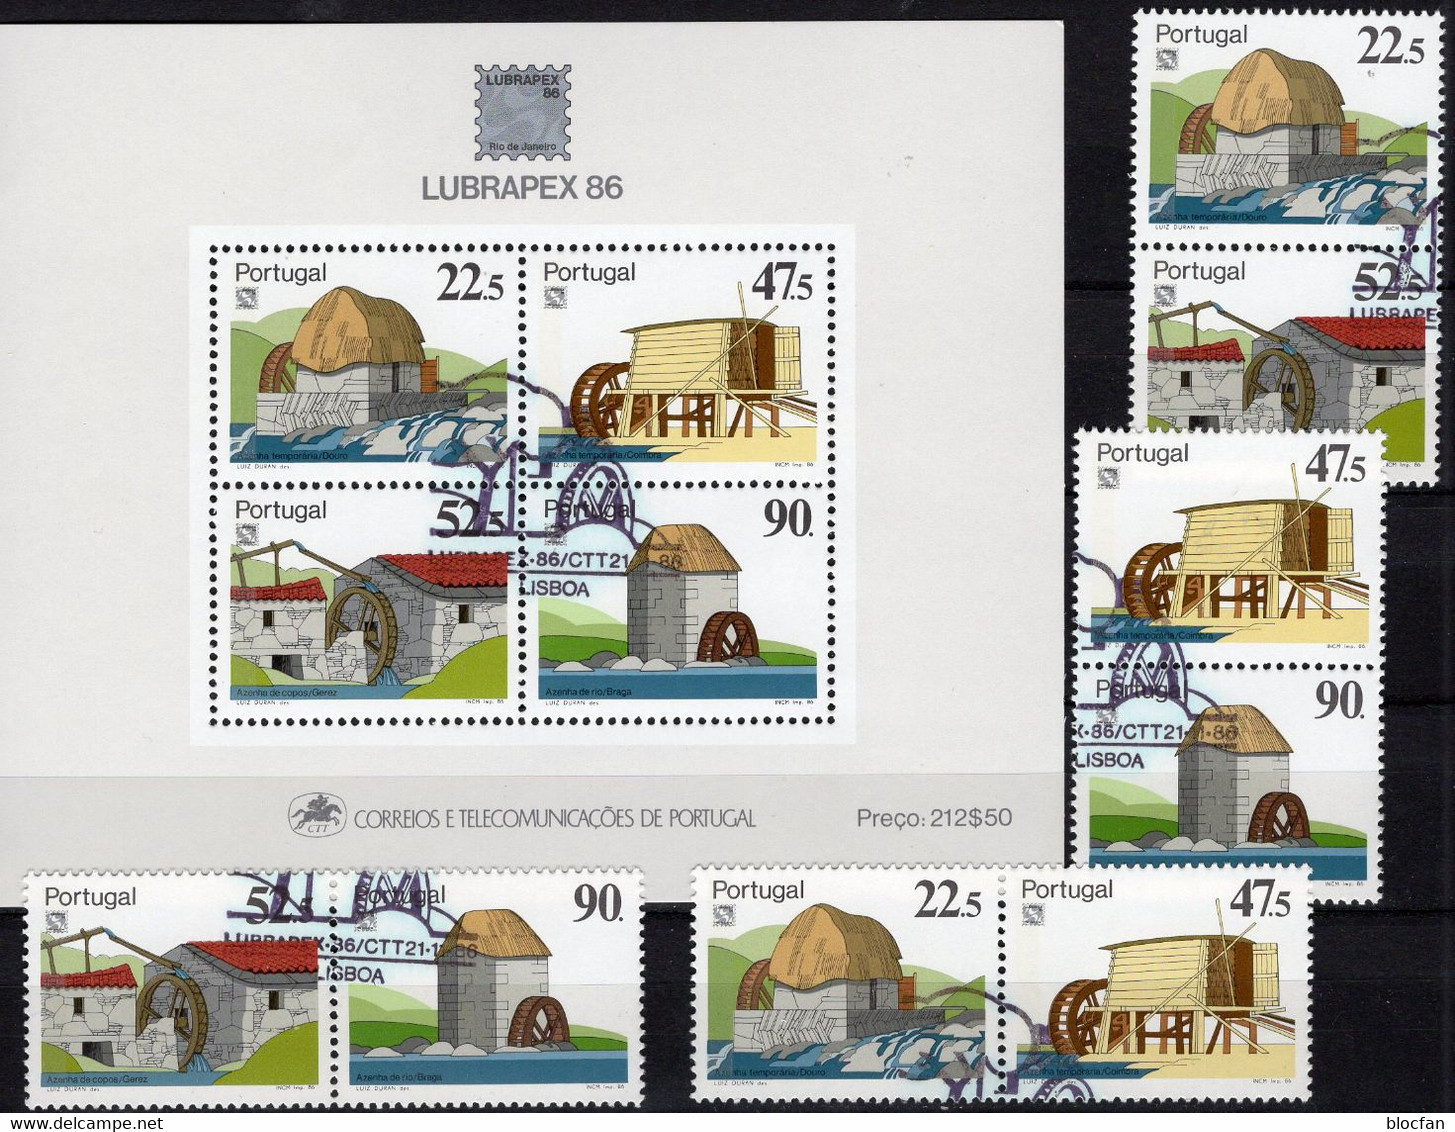 LUBRAPEX 1986 Portugal 1704/7 4ZD+Block 53 O 30€ Gemälde Mühle Coimbra Blocs Paintings Ss EXPO Se-tetnants Bf Philatelic - Collections